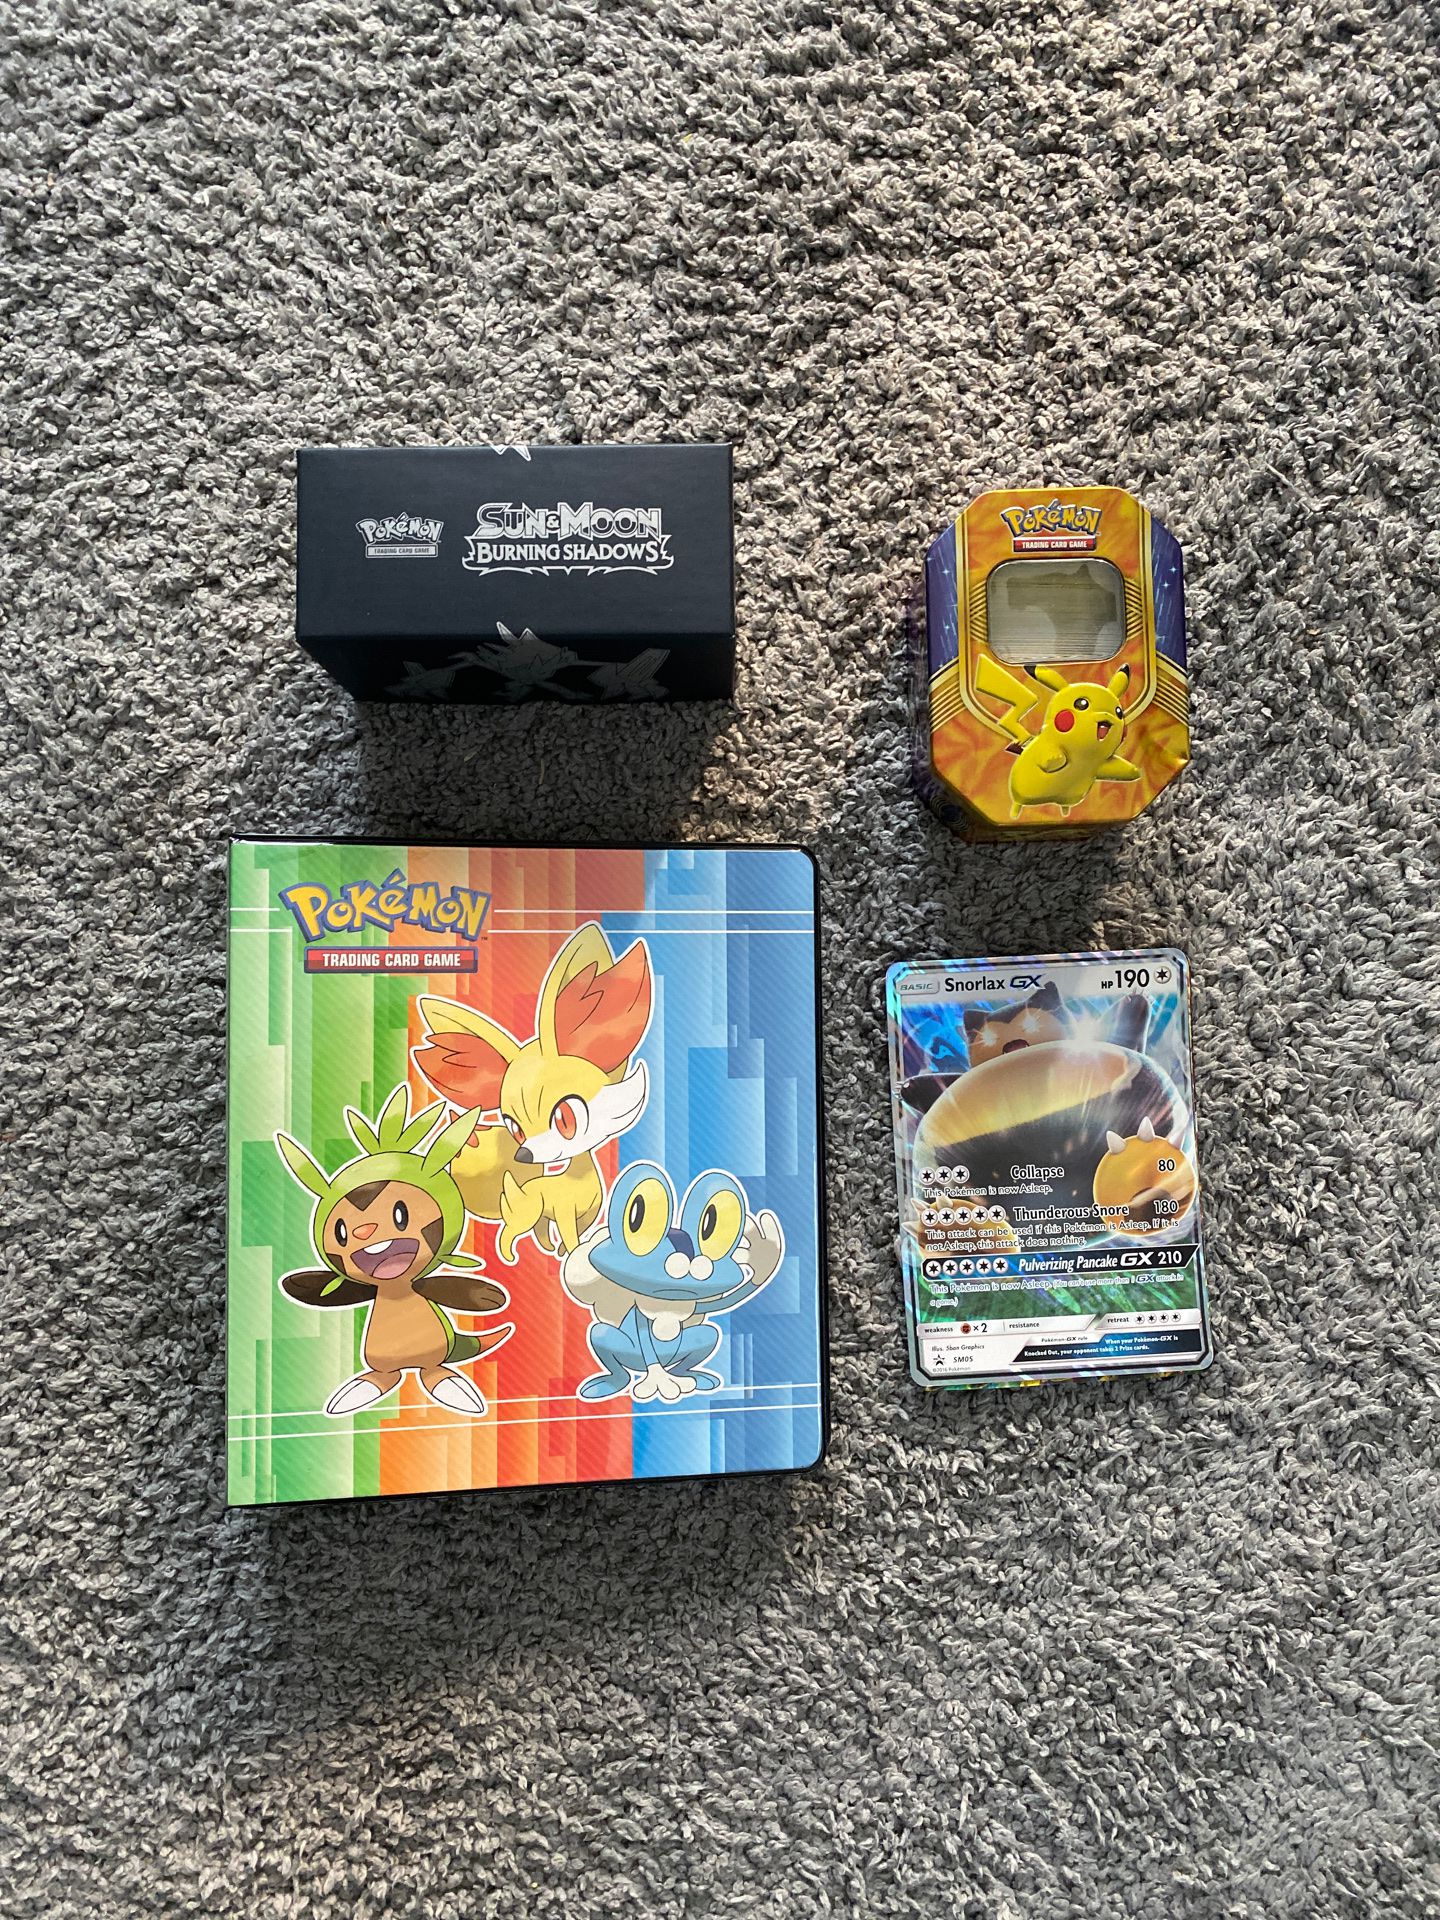 Pokémon Trading cards and accessories